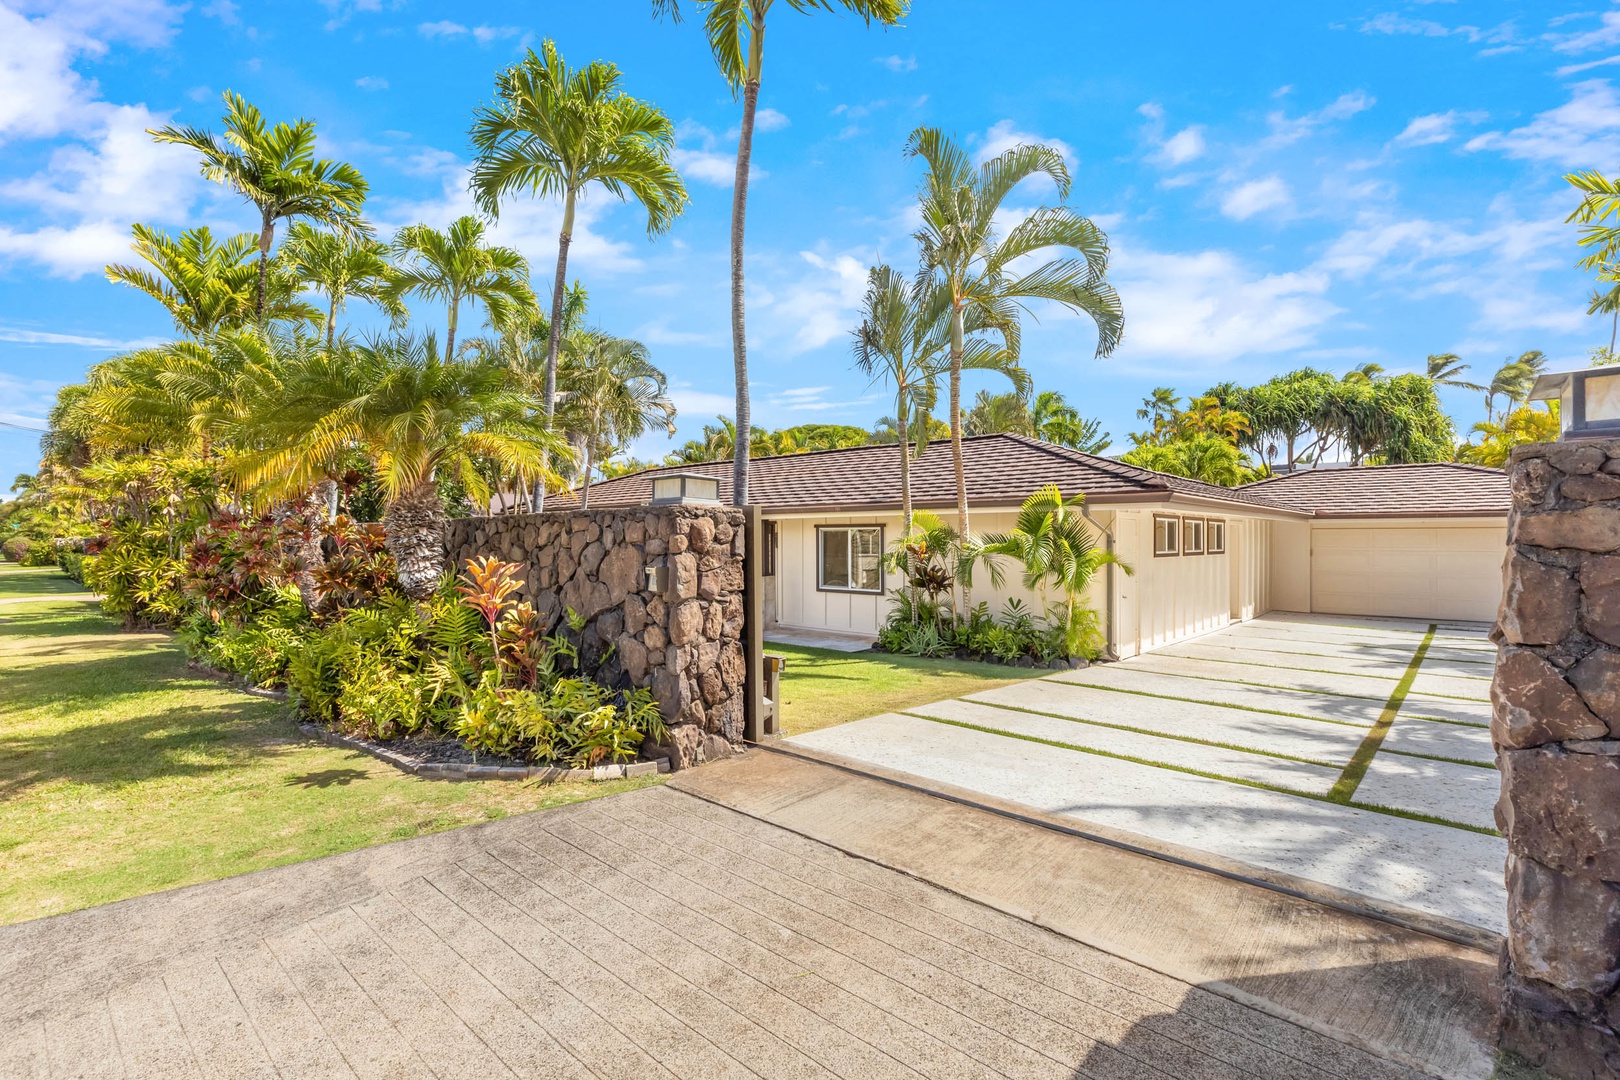 Honolulu Vacation Rentals, Kahala Breeze - Welcoming home entrance with tropical landscaping and a spacious driveway.